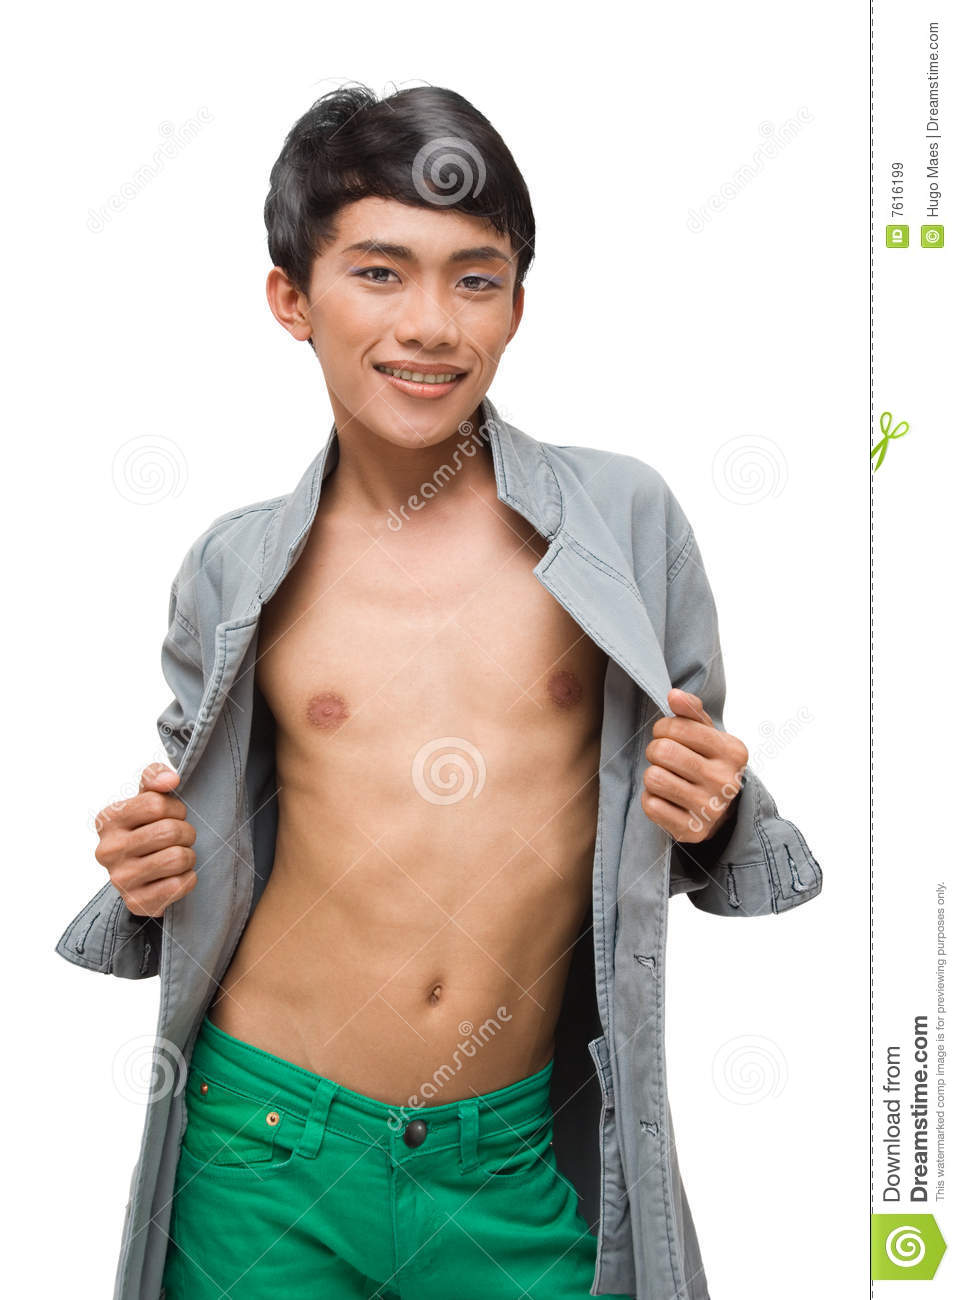 Asian Male Fashion Model Royalty Free Stock Images   Image  7616199